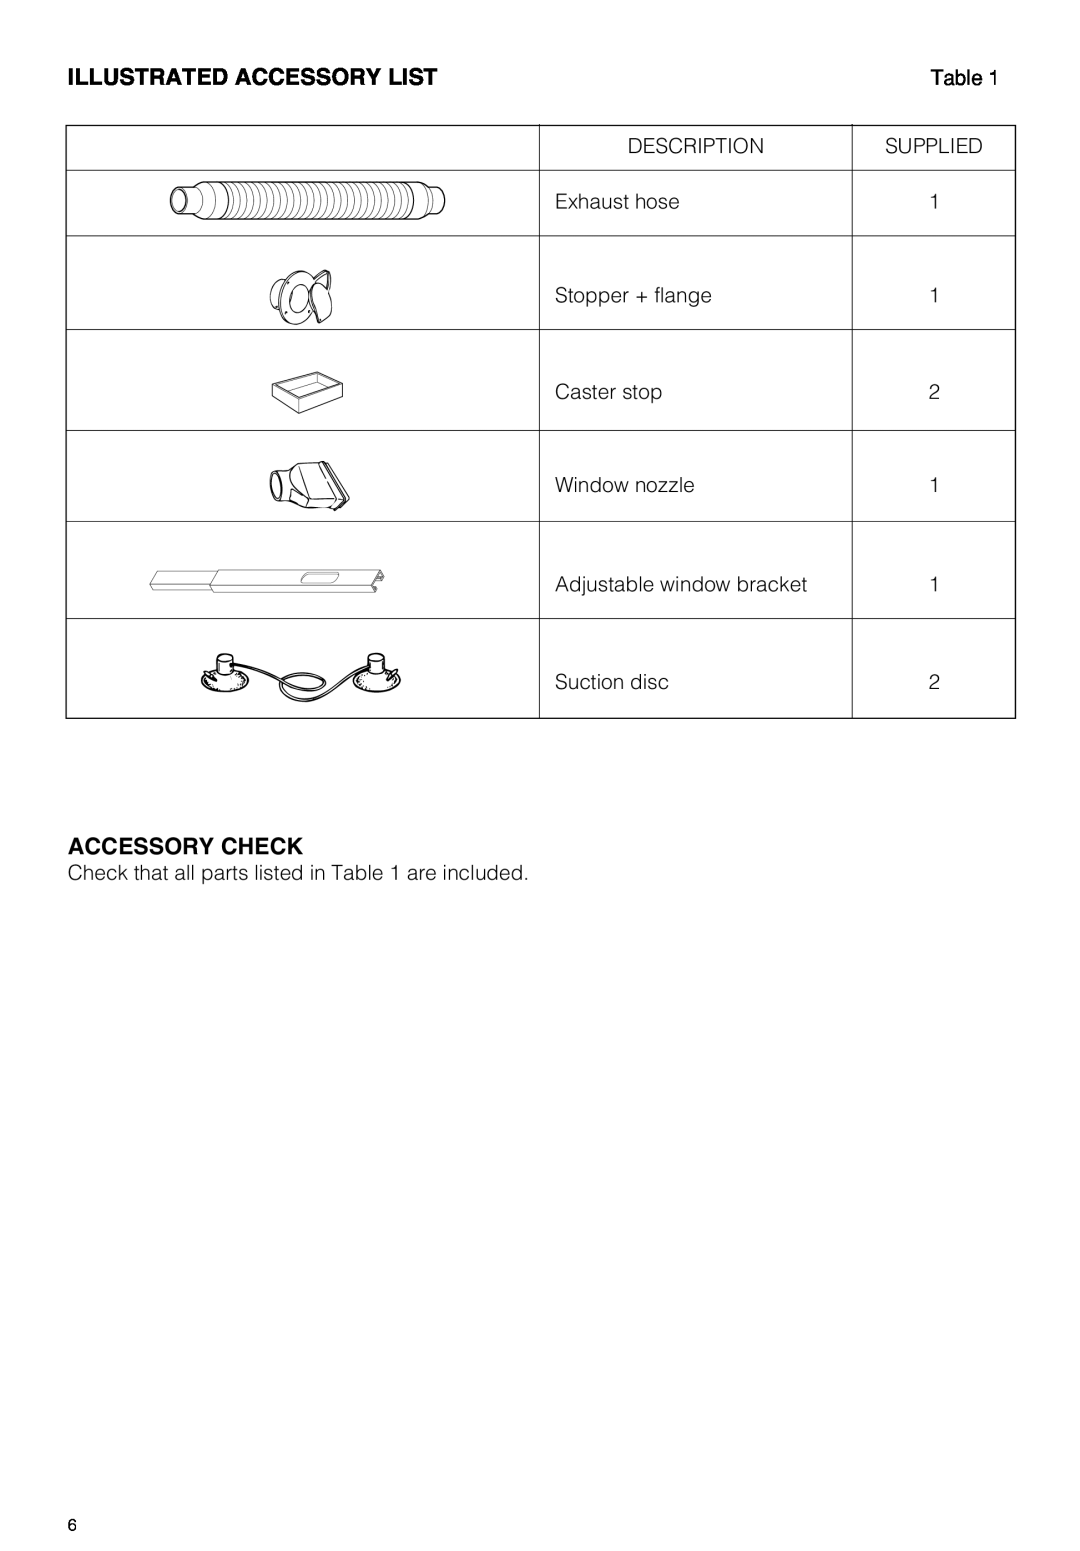 DeLonghi PAC 210 U owner manual Illustrated Accessory List, Accessory Check 